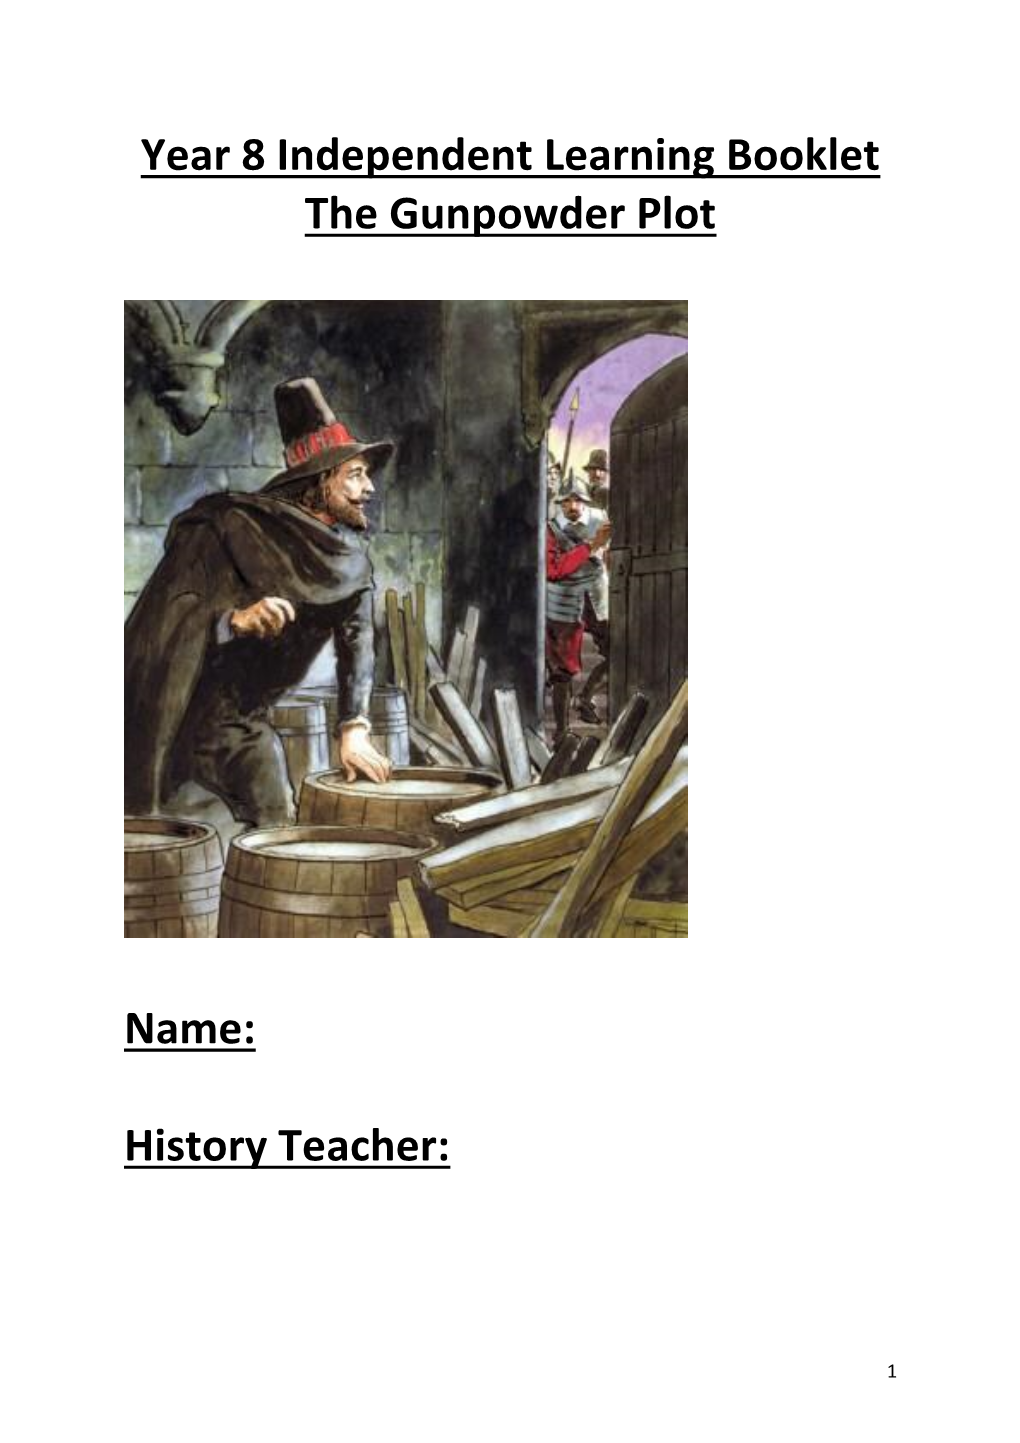 Year 8 Independent Learning Booklet the Gunpowder Plot Name: History Teacher